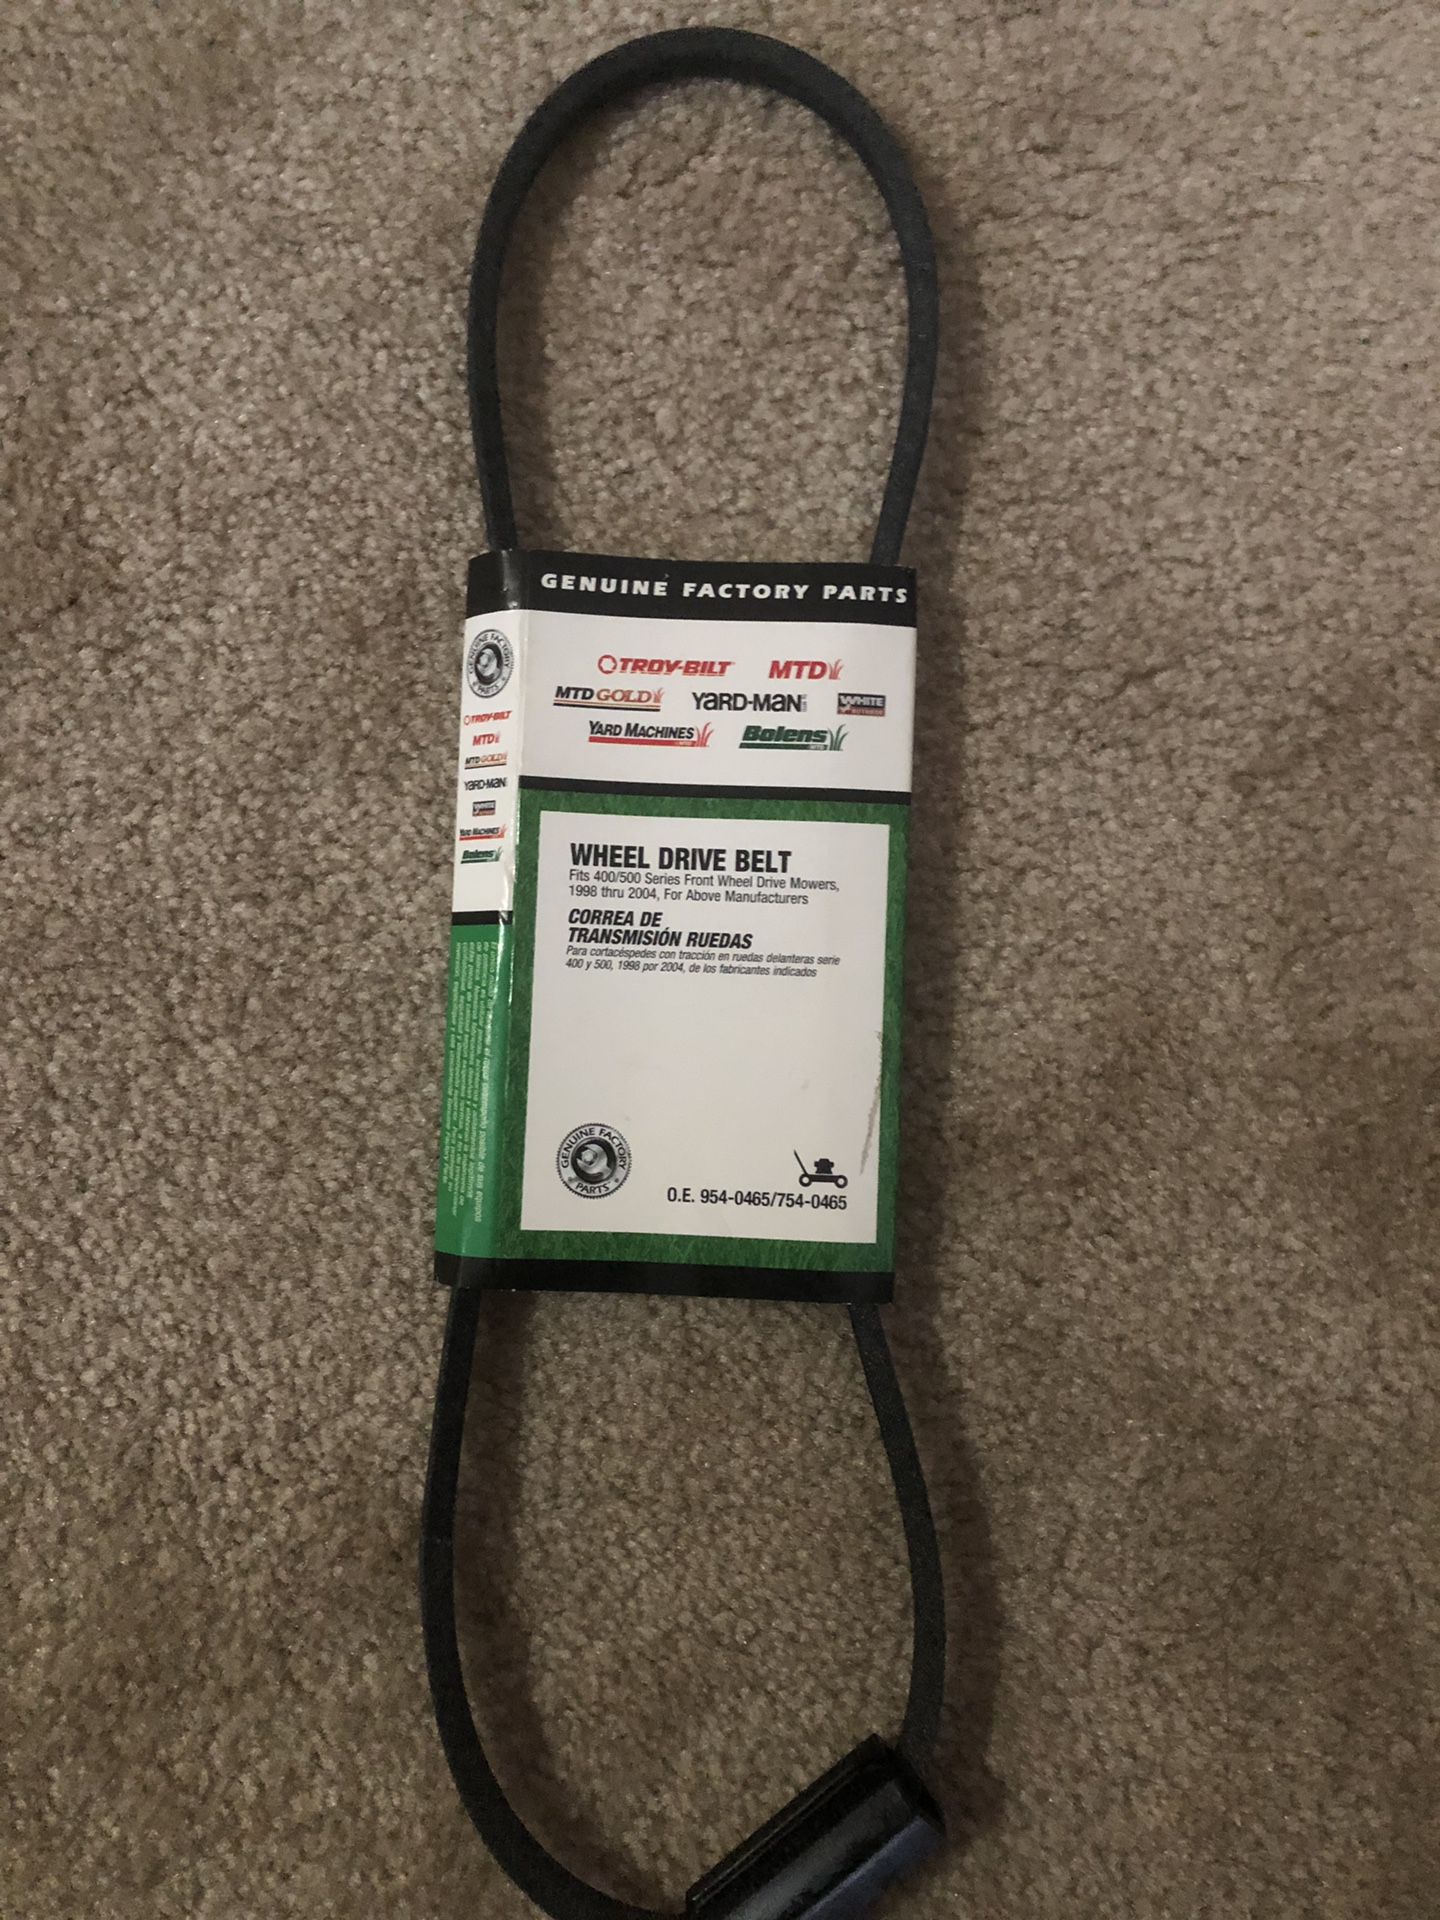 Drive belt for Lawn mower tractor